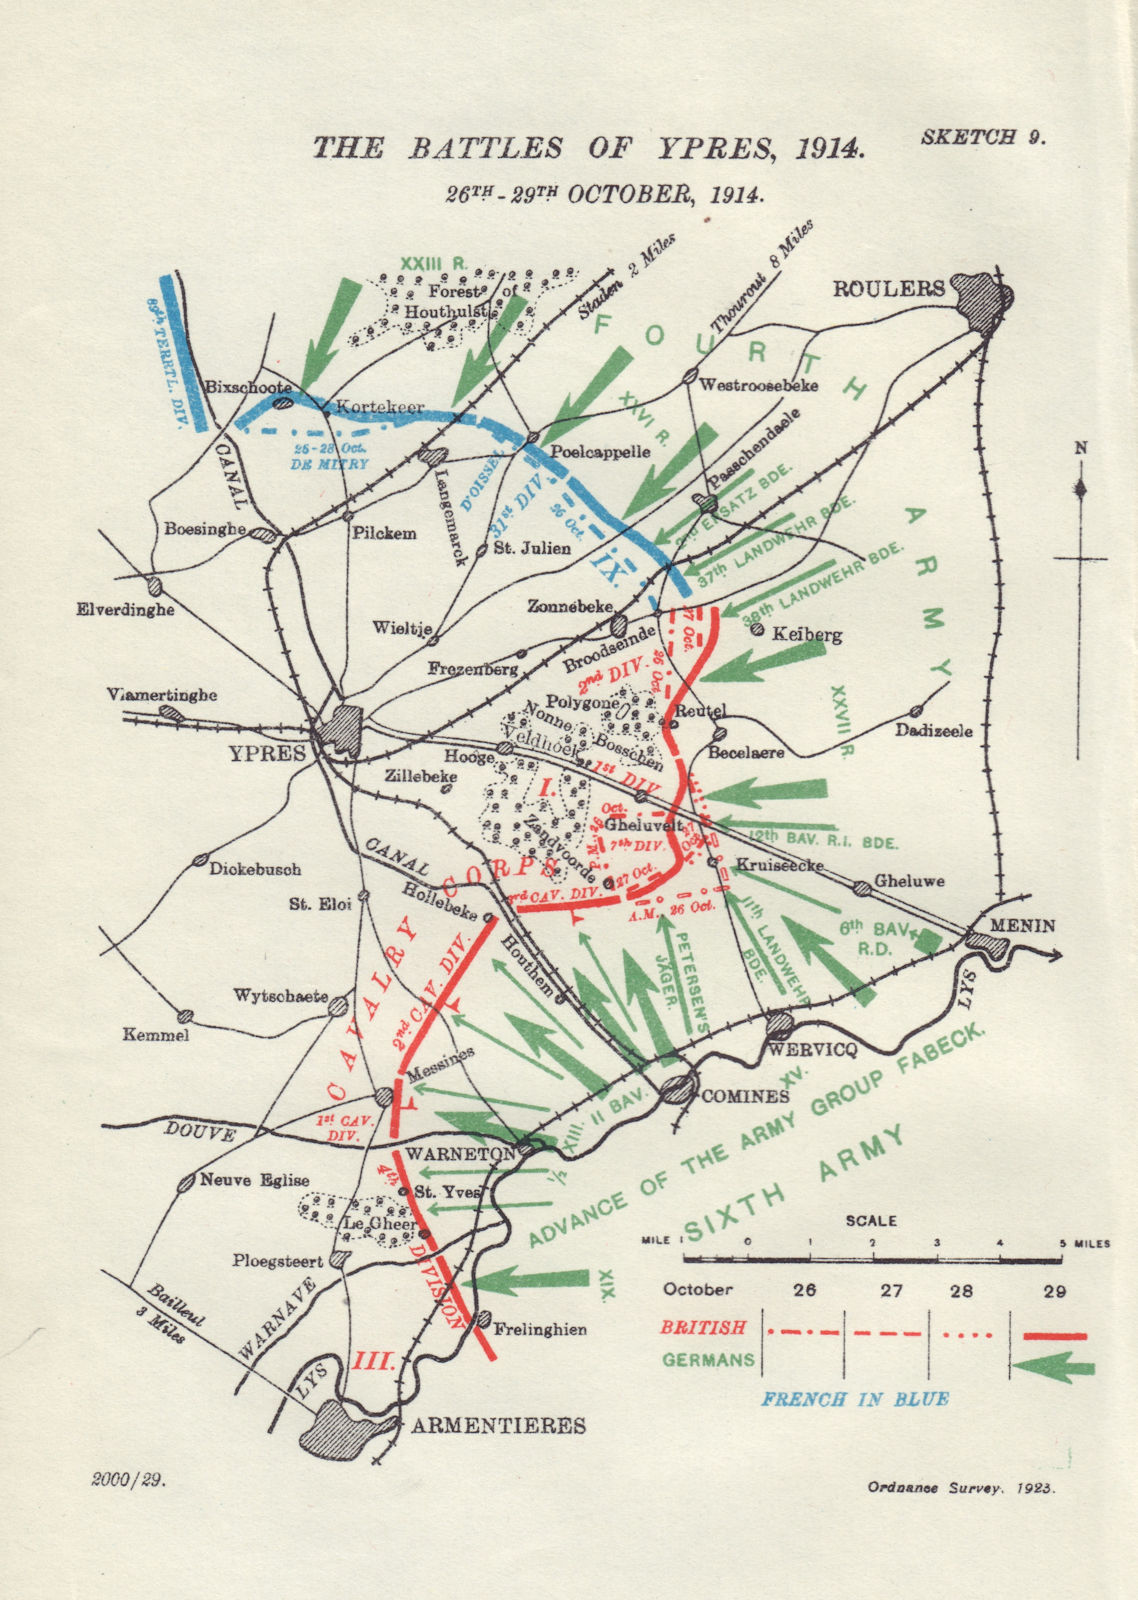 Battle of Ypres, 26th-29th October, 1914. First World War. 1925 old map